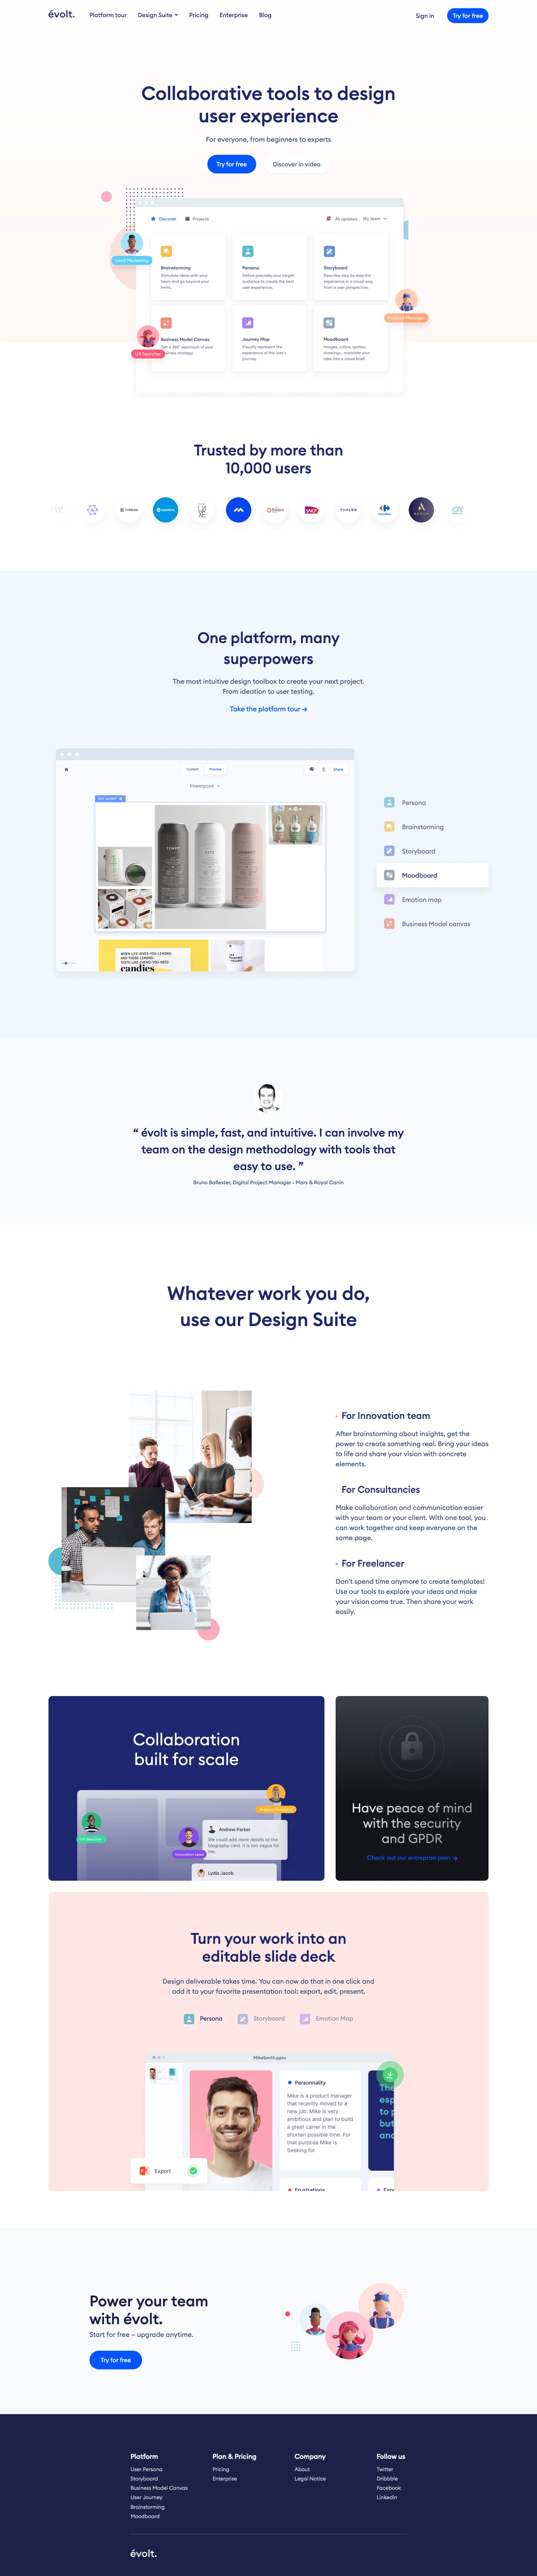 évolt Landing Page Example: évolt is a collaborative platform dedicated to User Experience (UX). Test our design tools like the Brainstorm, Persona, Storyboard, Moodboard, Empathy map.